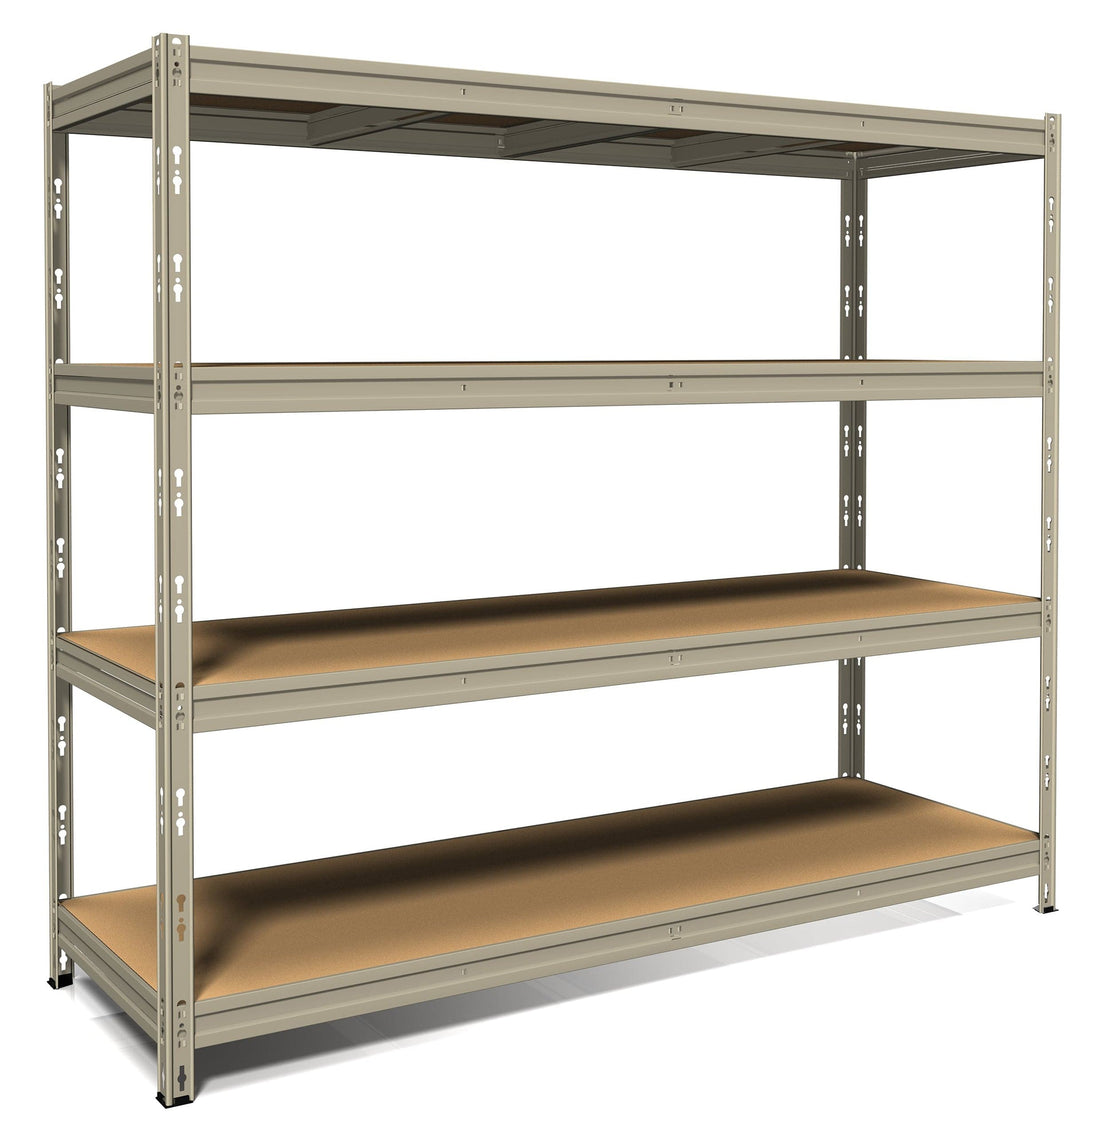 Metal and Wood Shelf L210XP70XH180CM, 400 KG, 4 Shelves Gray Spaceo - best price from Maltashopper.com BR410007451